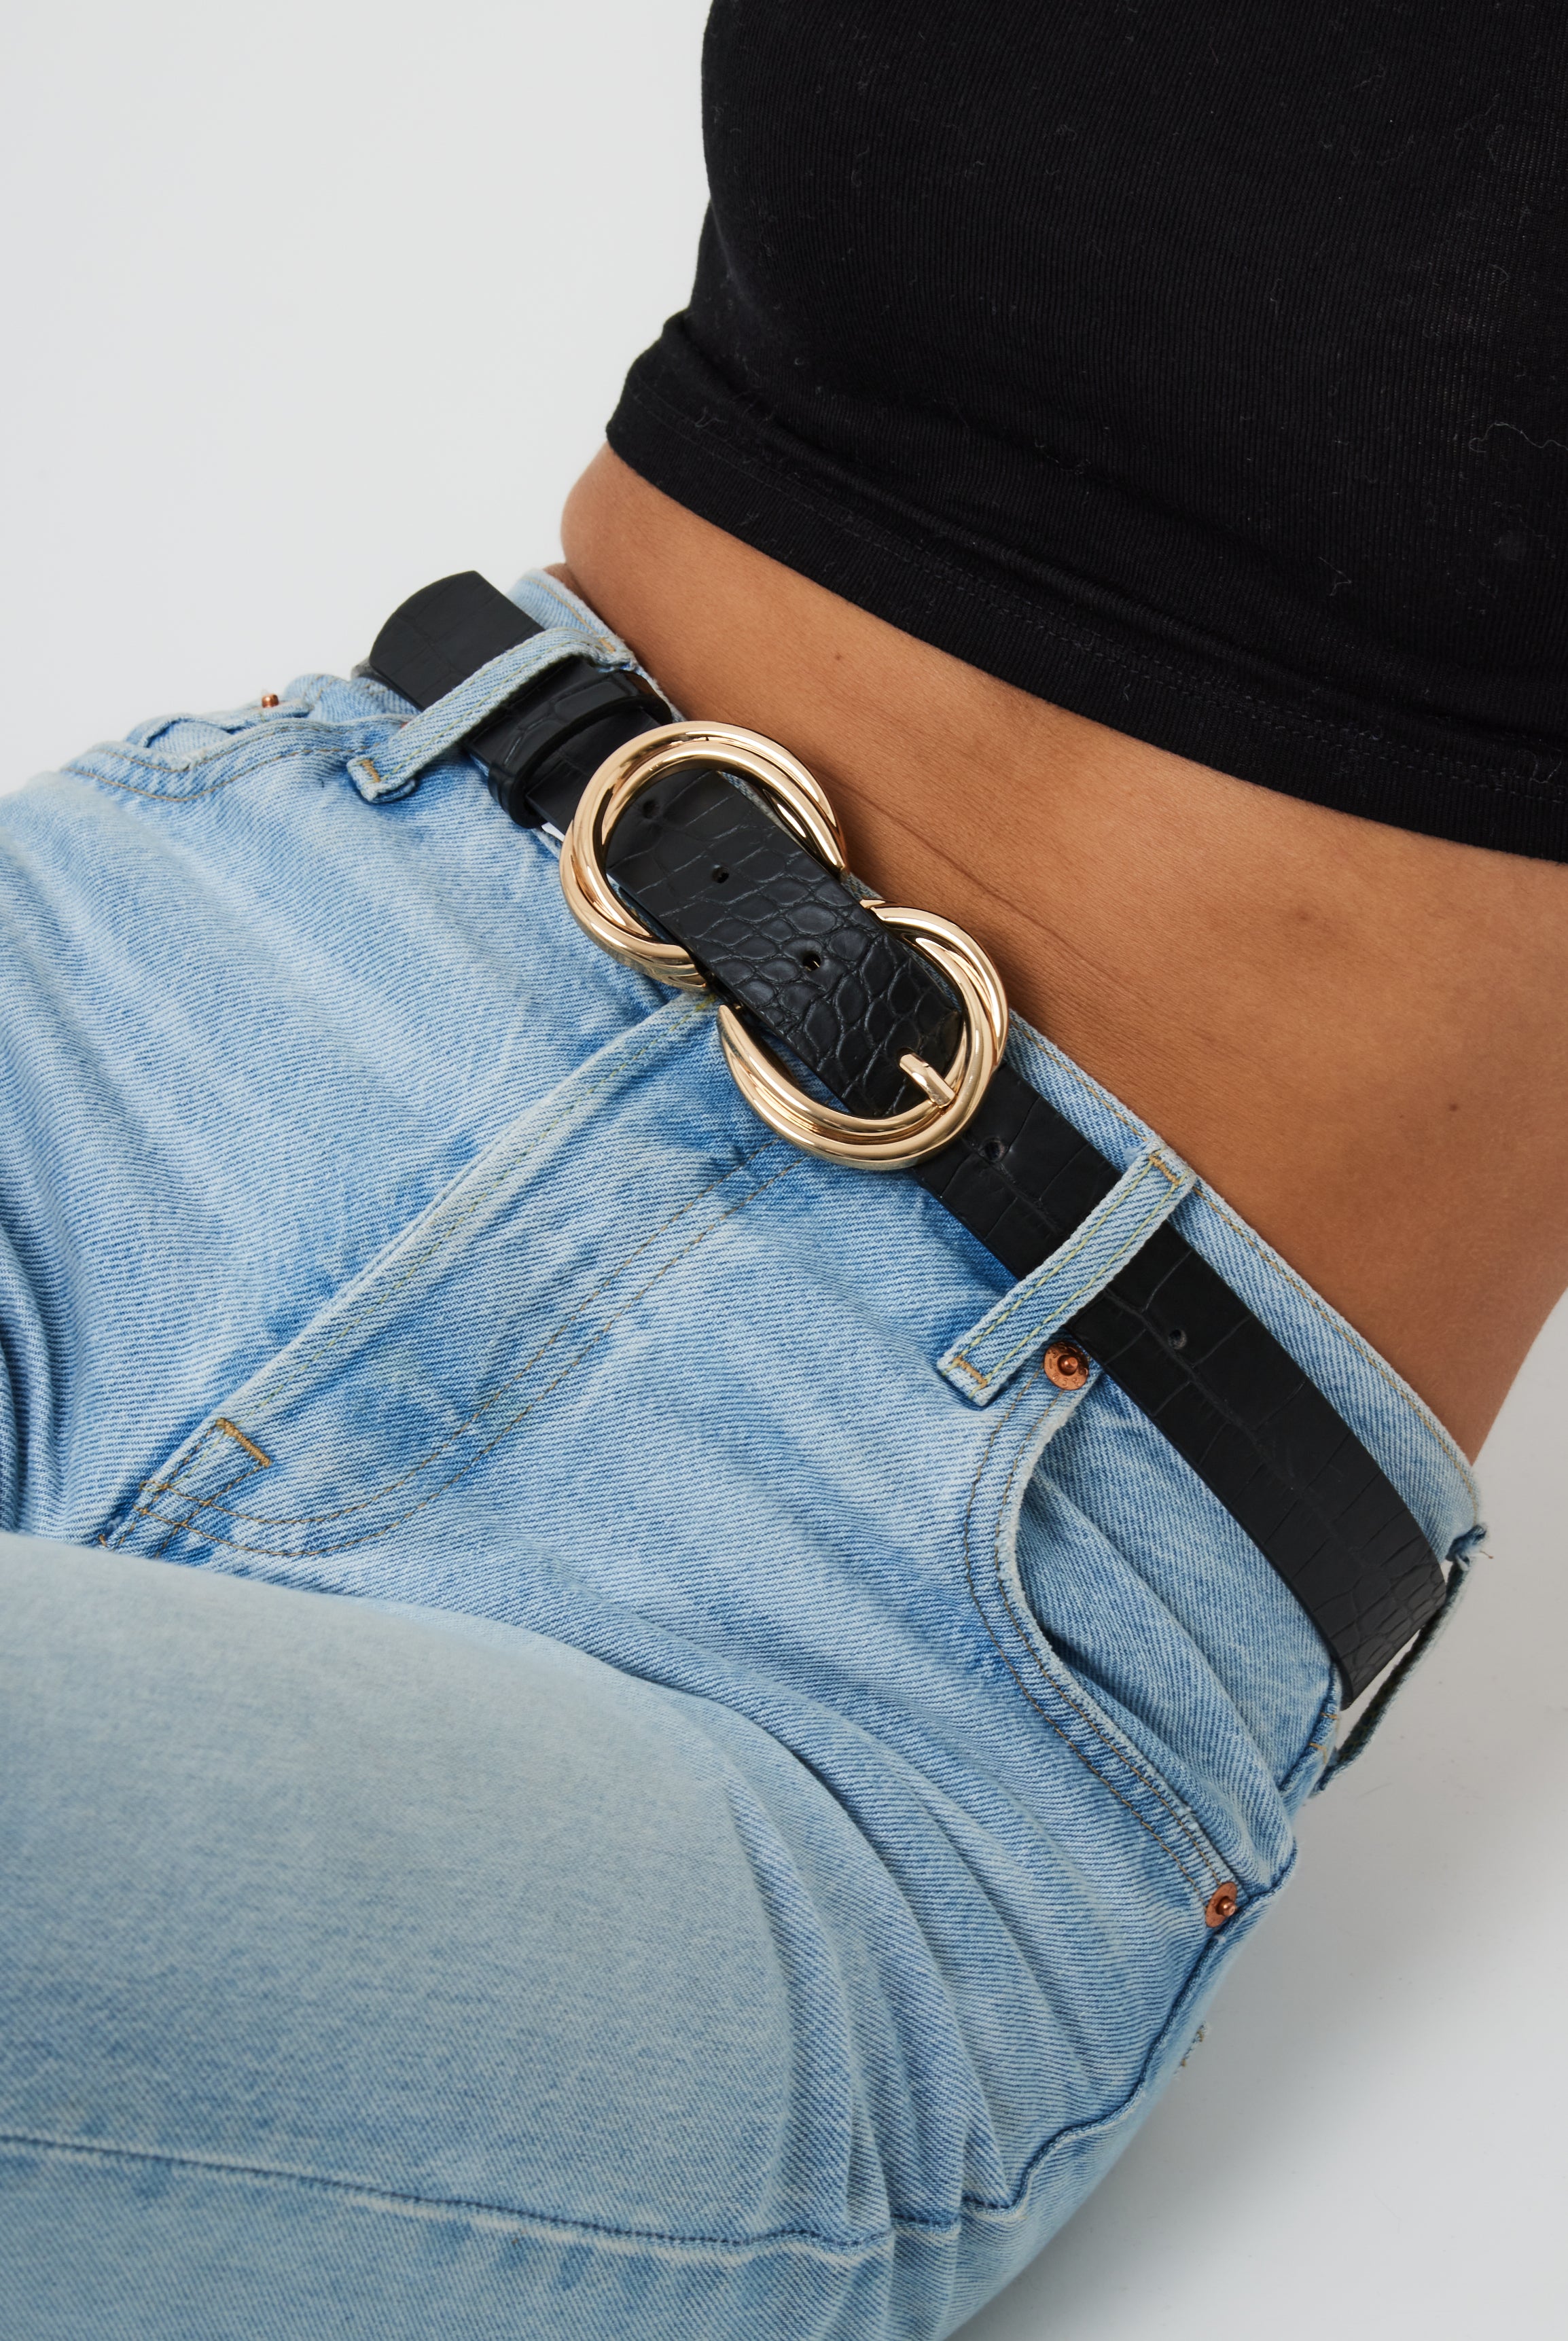 My Accessories London Double Twisted belt in Black Croc | Festival | Going out | Layering | Streetstyle | Women's | Women's Accessories | Animal print |